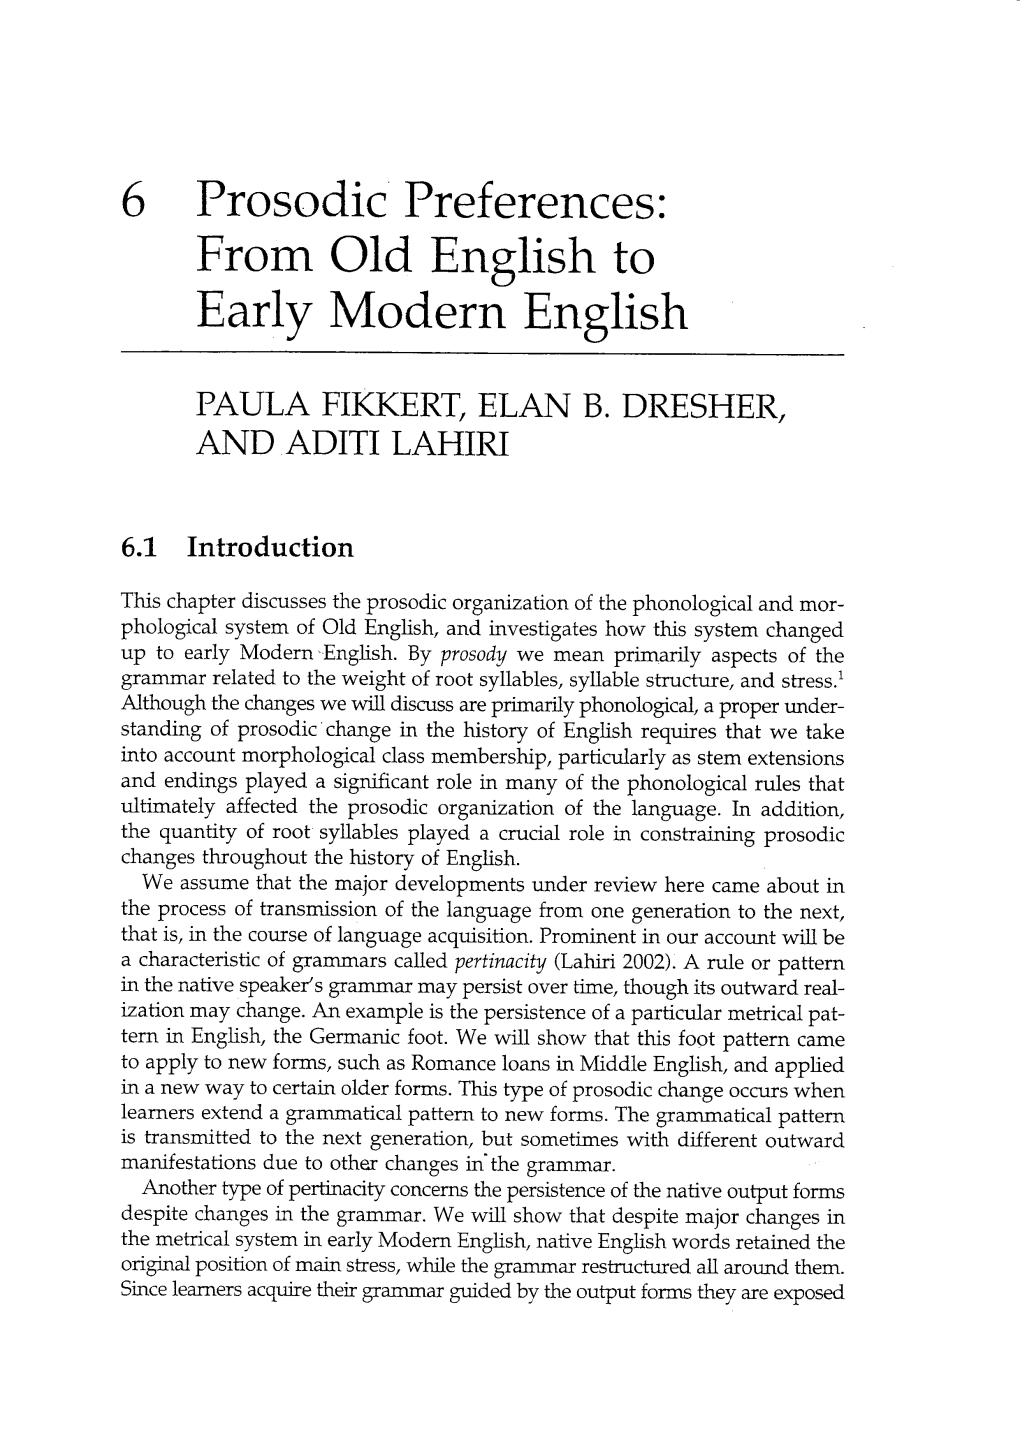 From Old English to Early Modern English